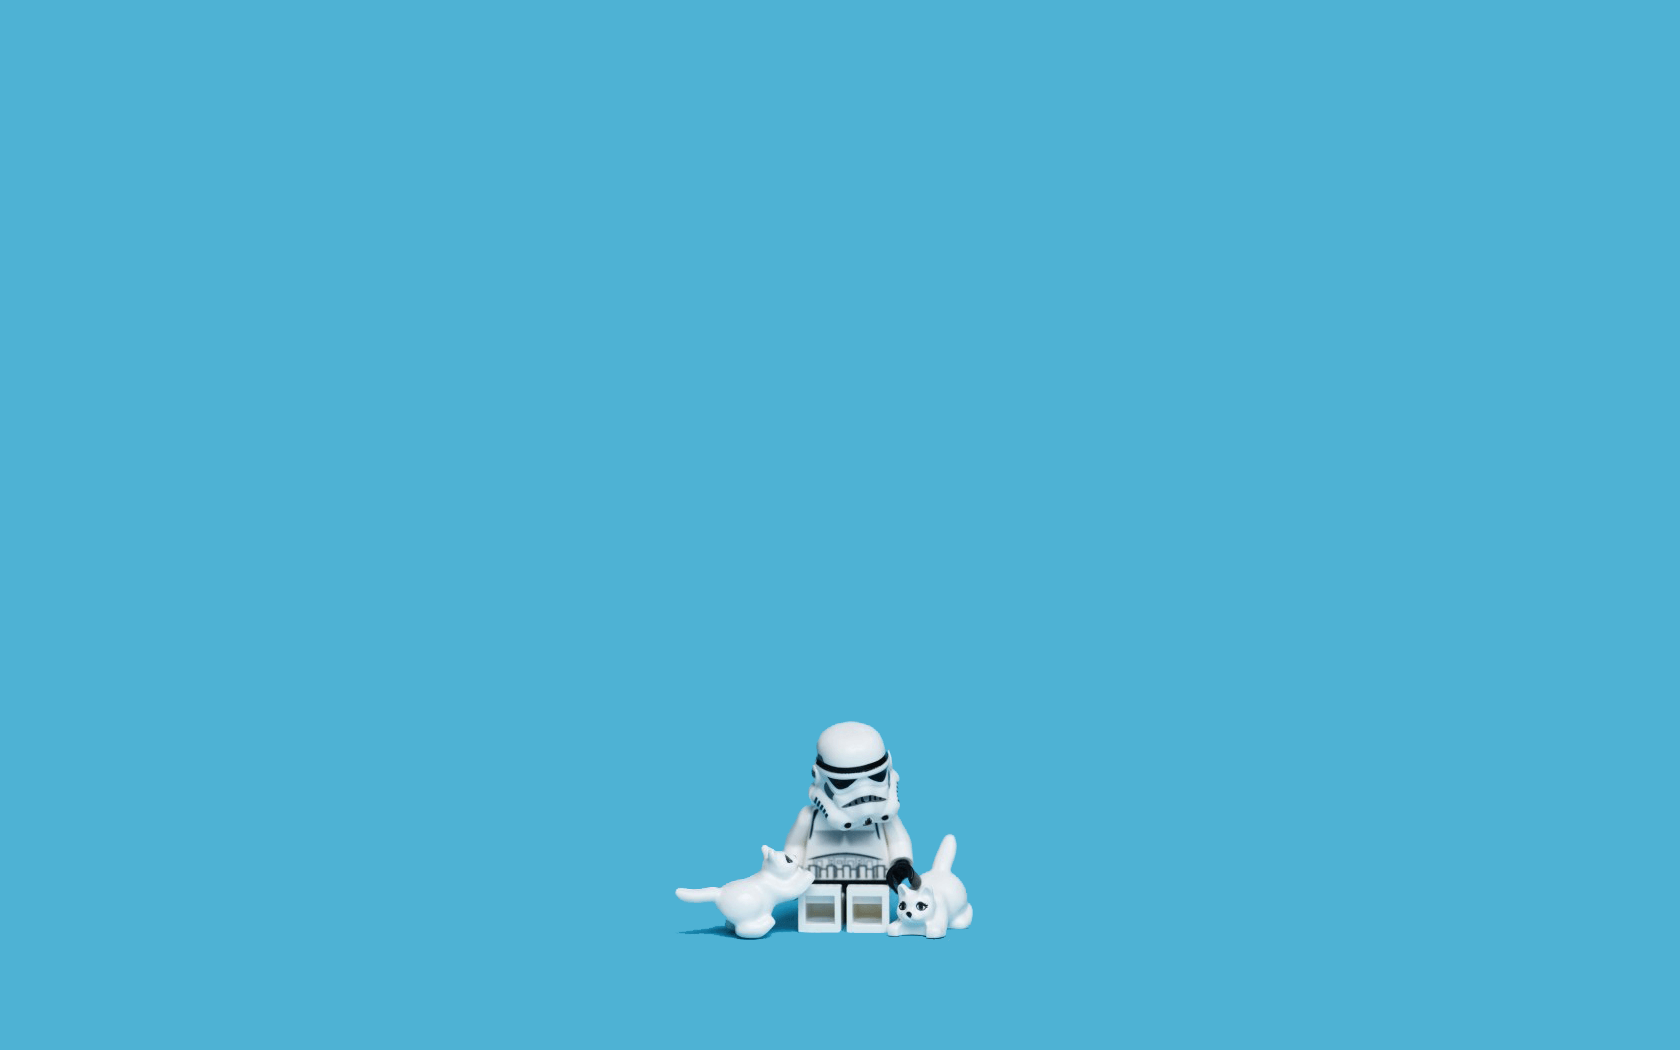 LEGO Star Wars Phone Wallpapers.